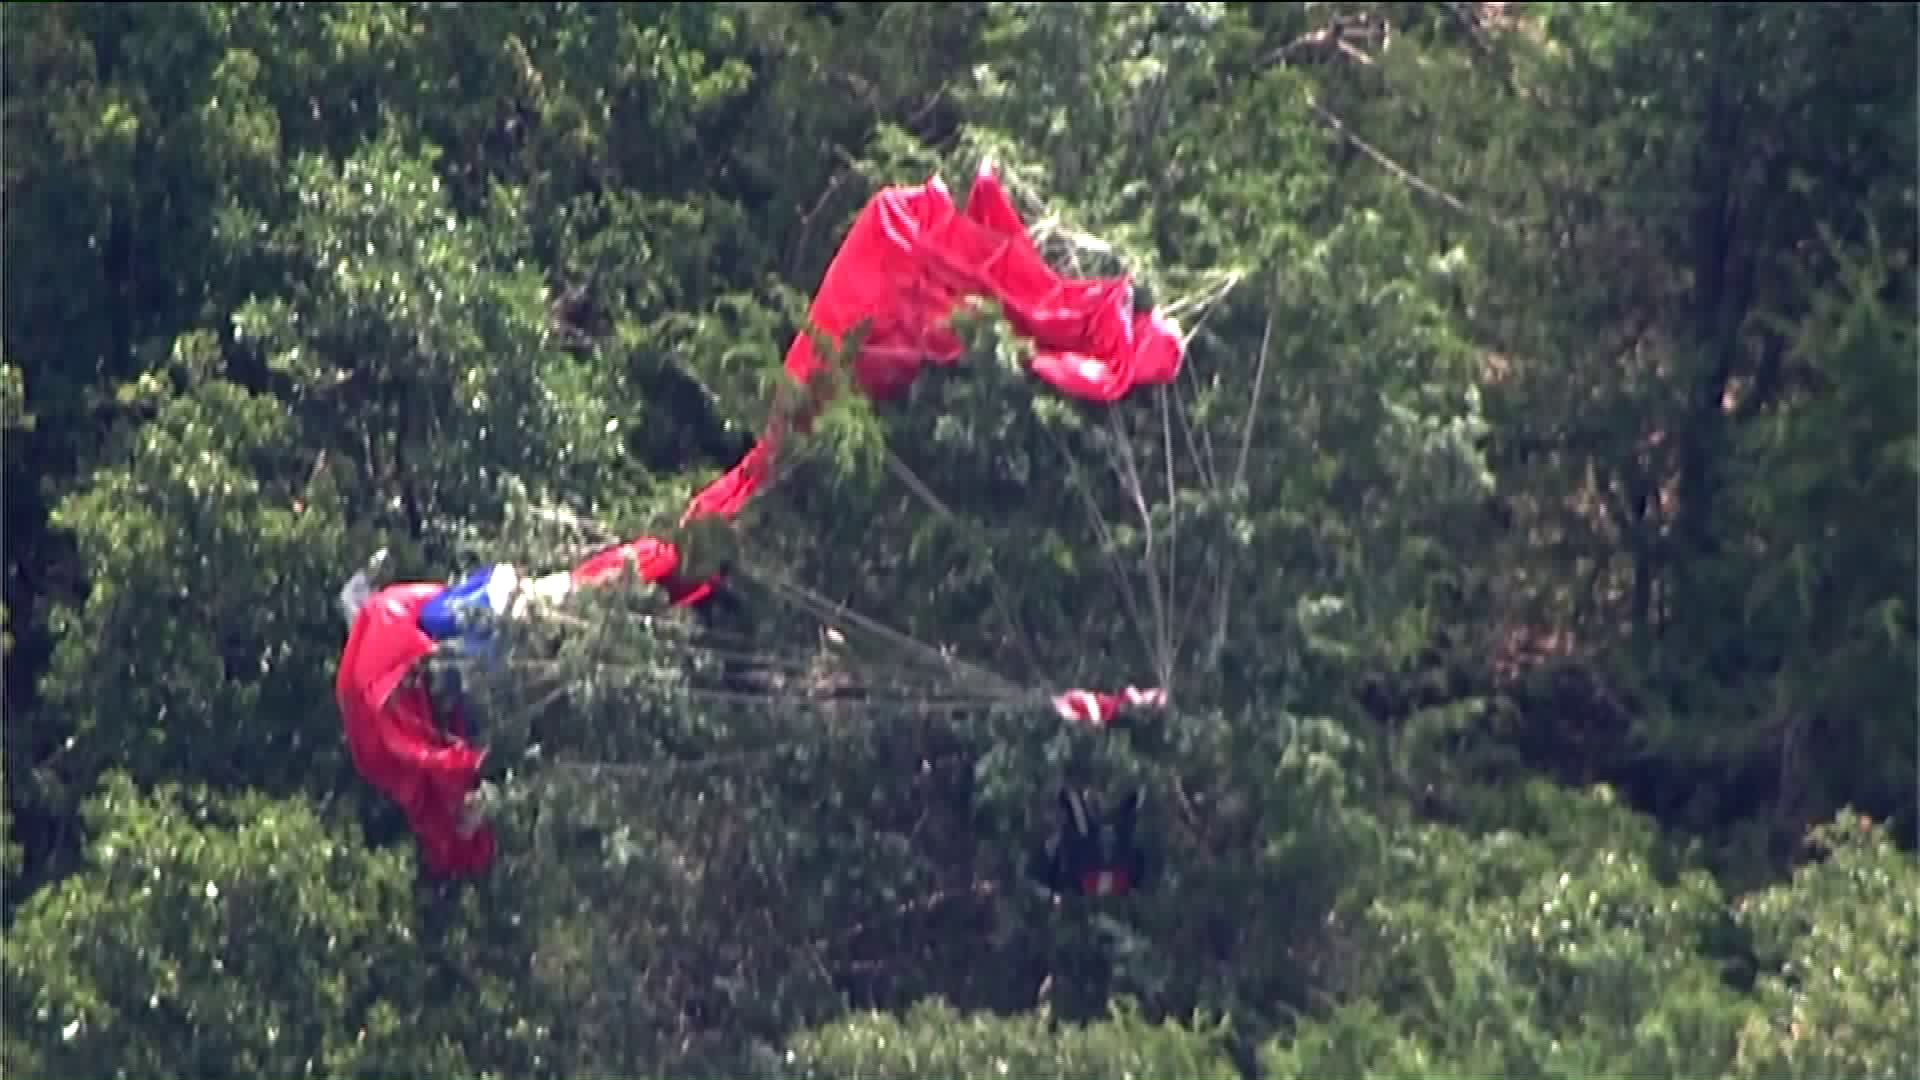 Search crews find body of missing skydiver, officials say | KFOR.com